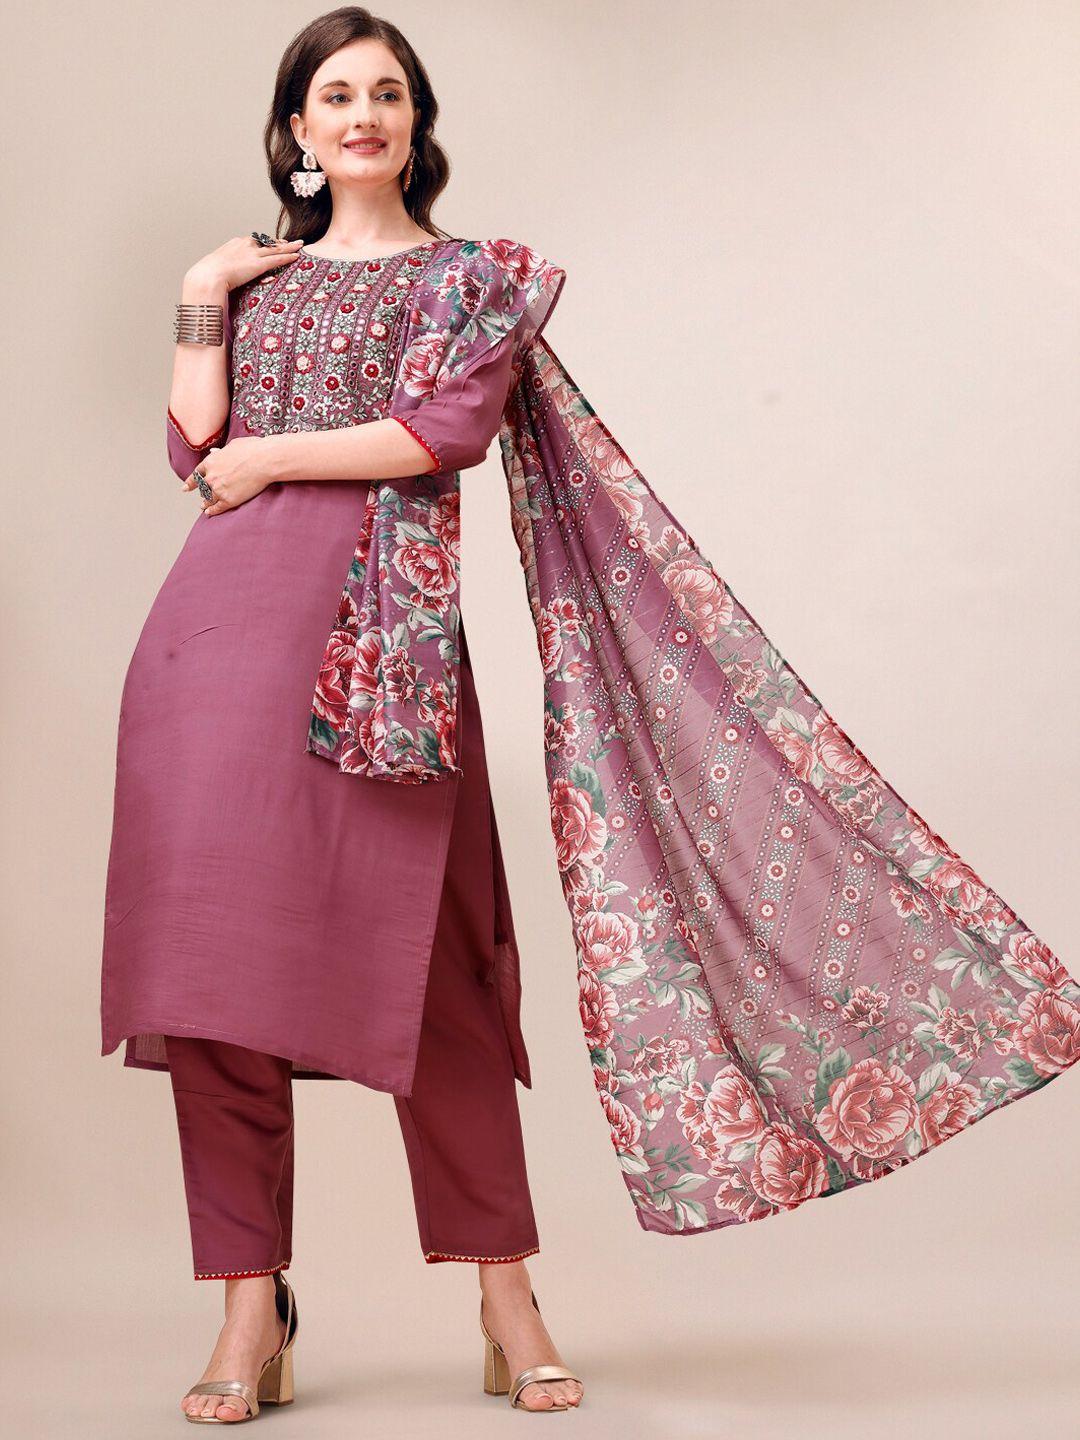 Berrylicious Floral Embroidered Thread Work Chanderi Cotton Kurta With Trousers & Dupatta